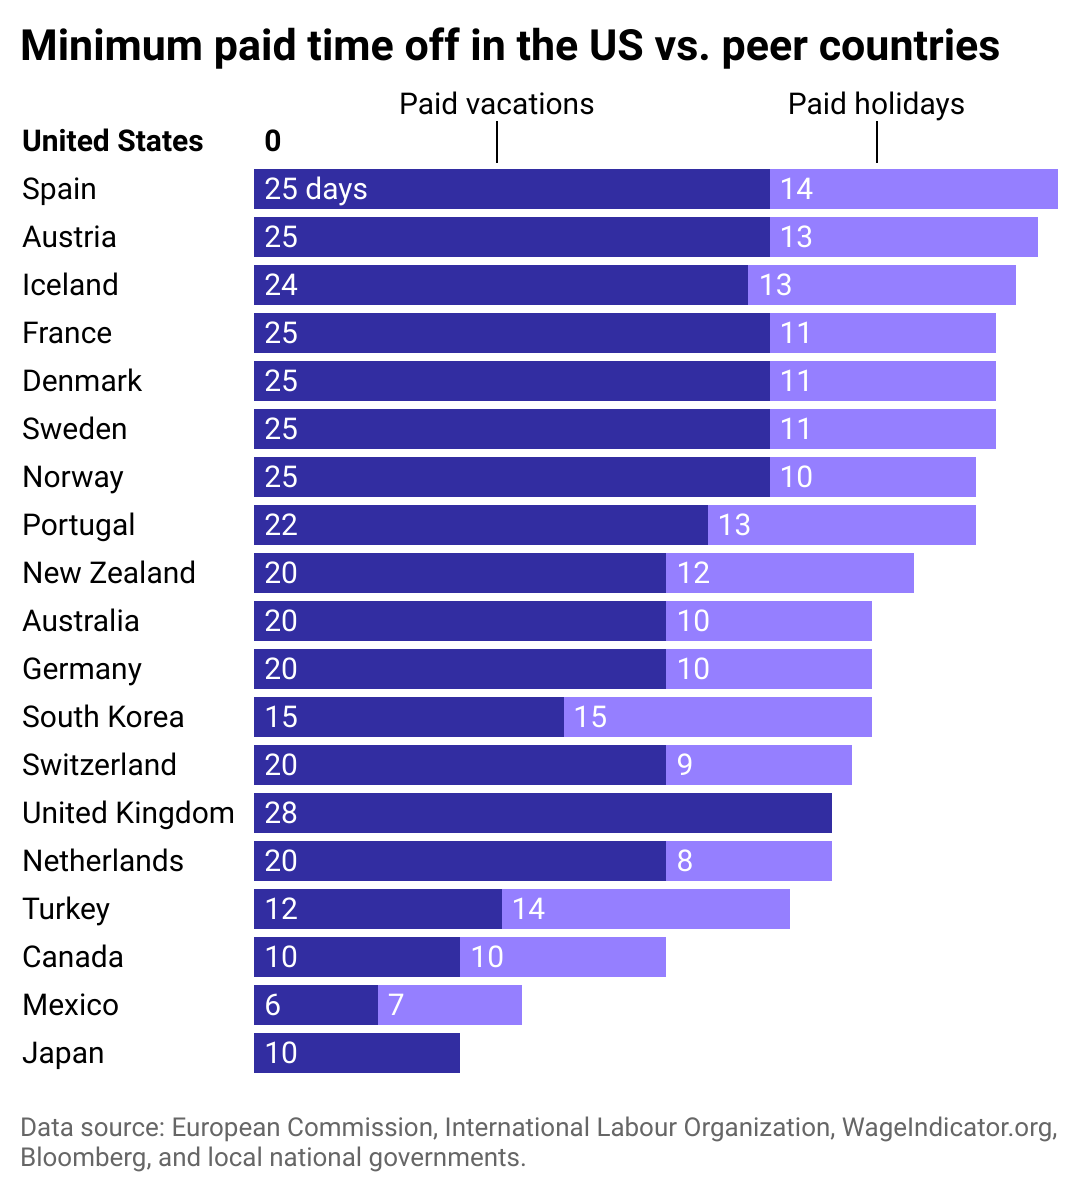 Bar chart comparing paid vacations and holidays in select OECD nations.